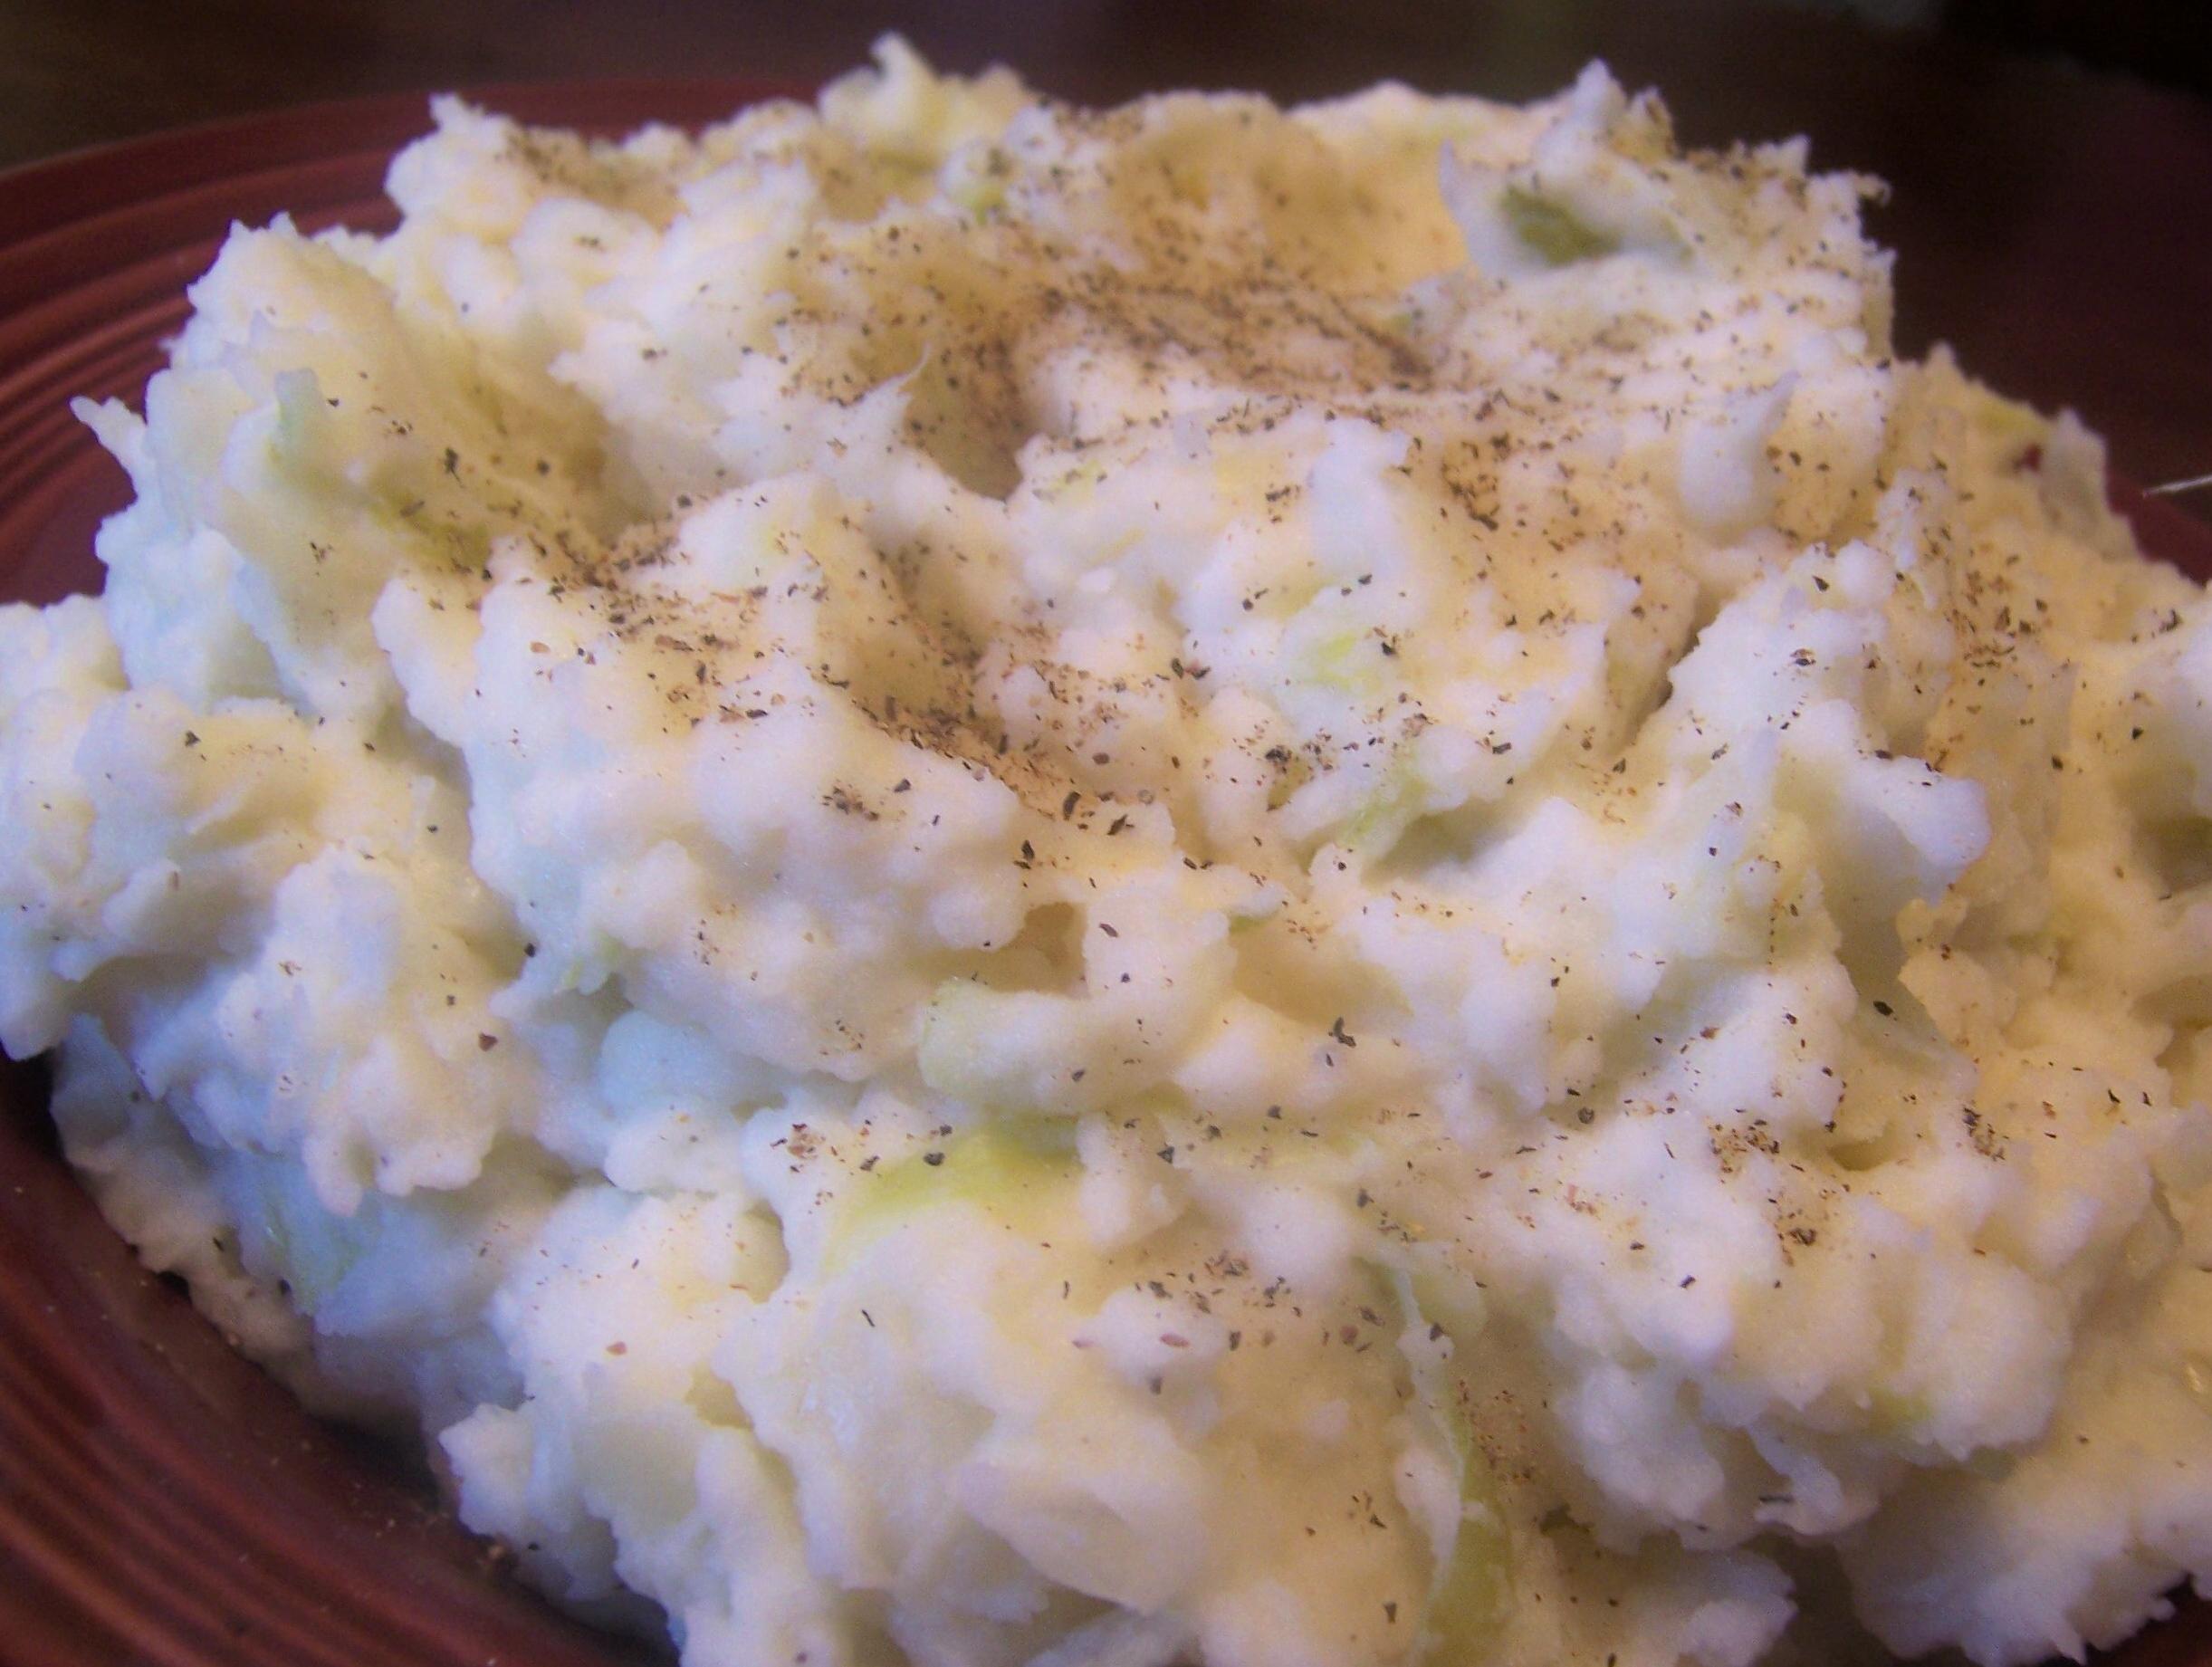  Take your classic mashed potatoes to the next level with this Irish-inspired recipe.